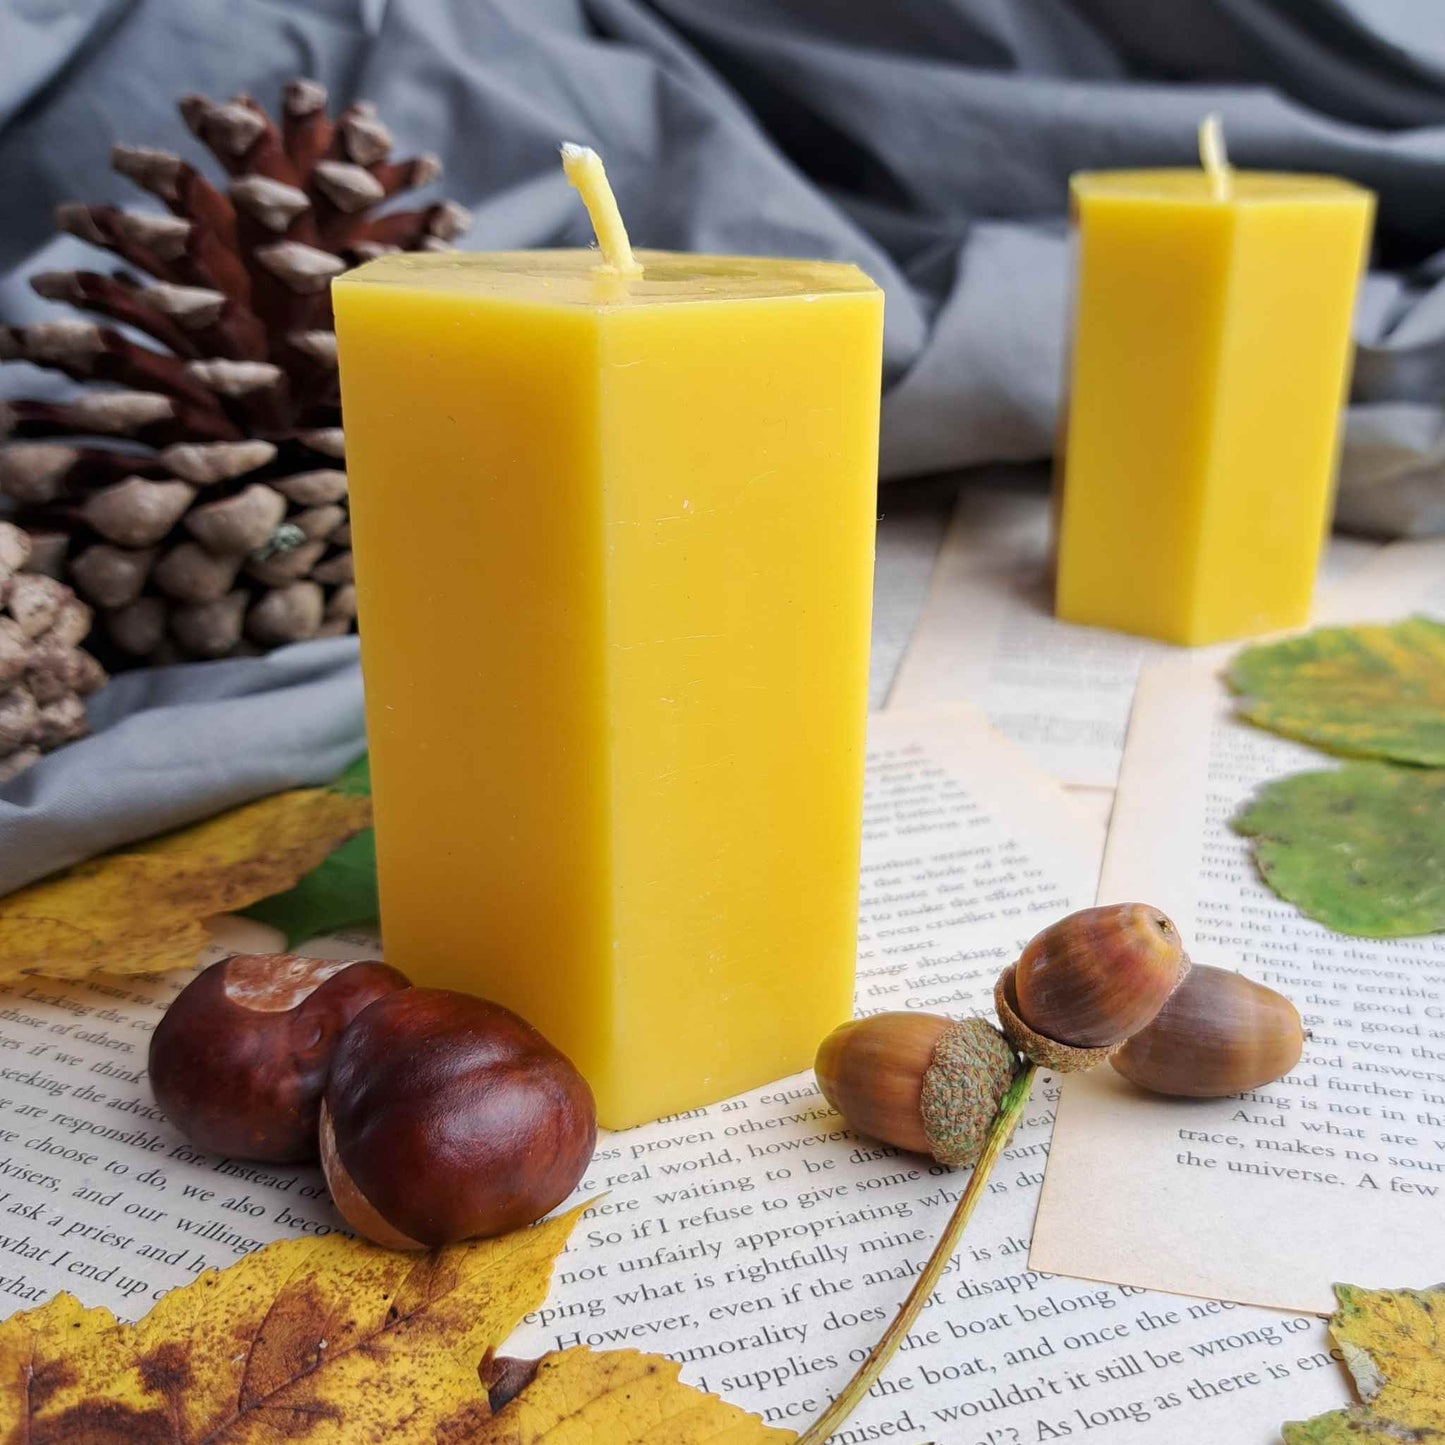 Handcrafted hexagonal pure beeswax pillar candle, eco-friendly and natural, perfect for adding a touch of elegance to home decor.